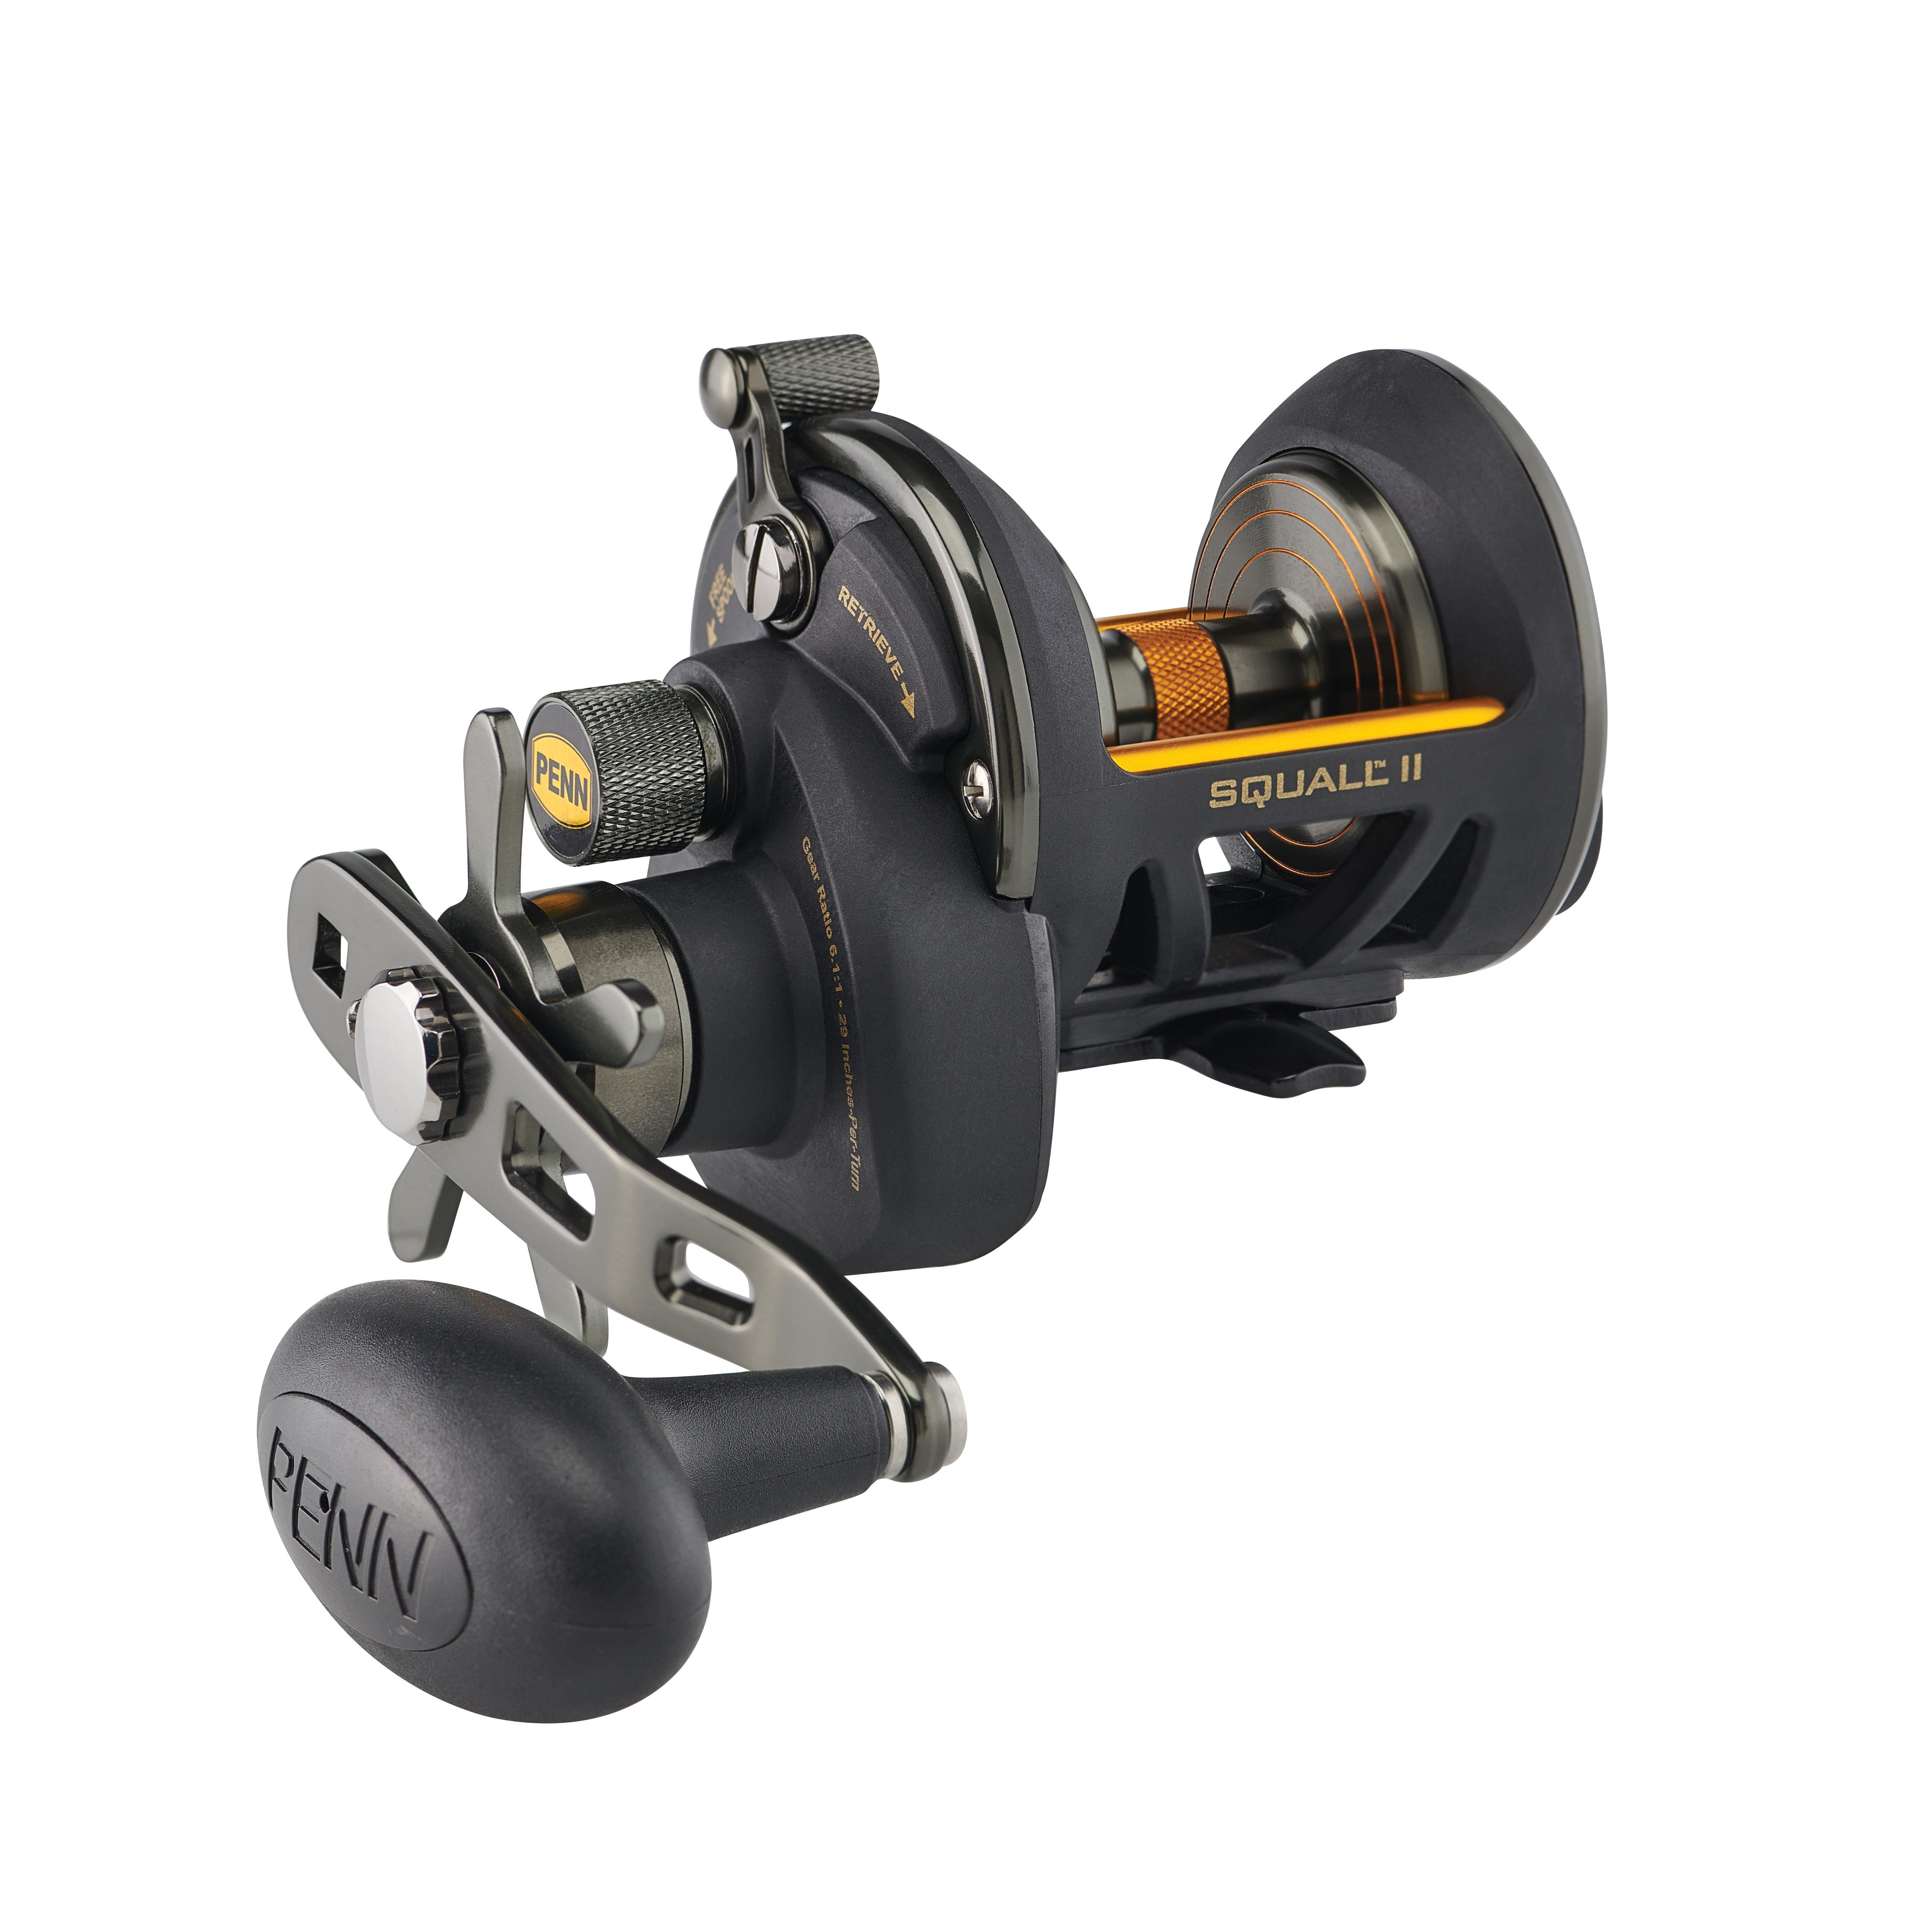 Penn Squall Lever Drag Conventional Reel